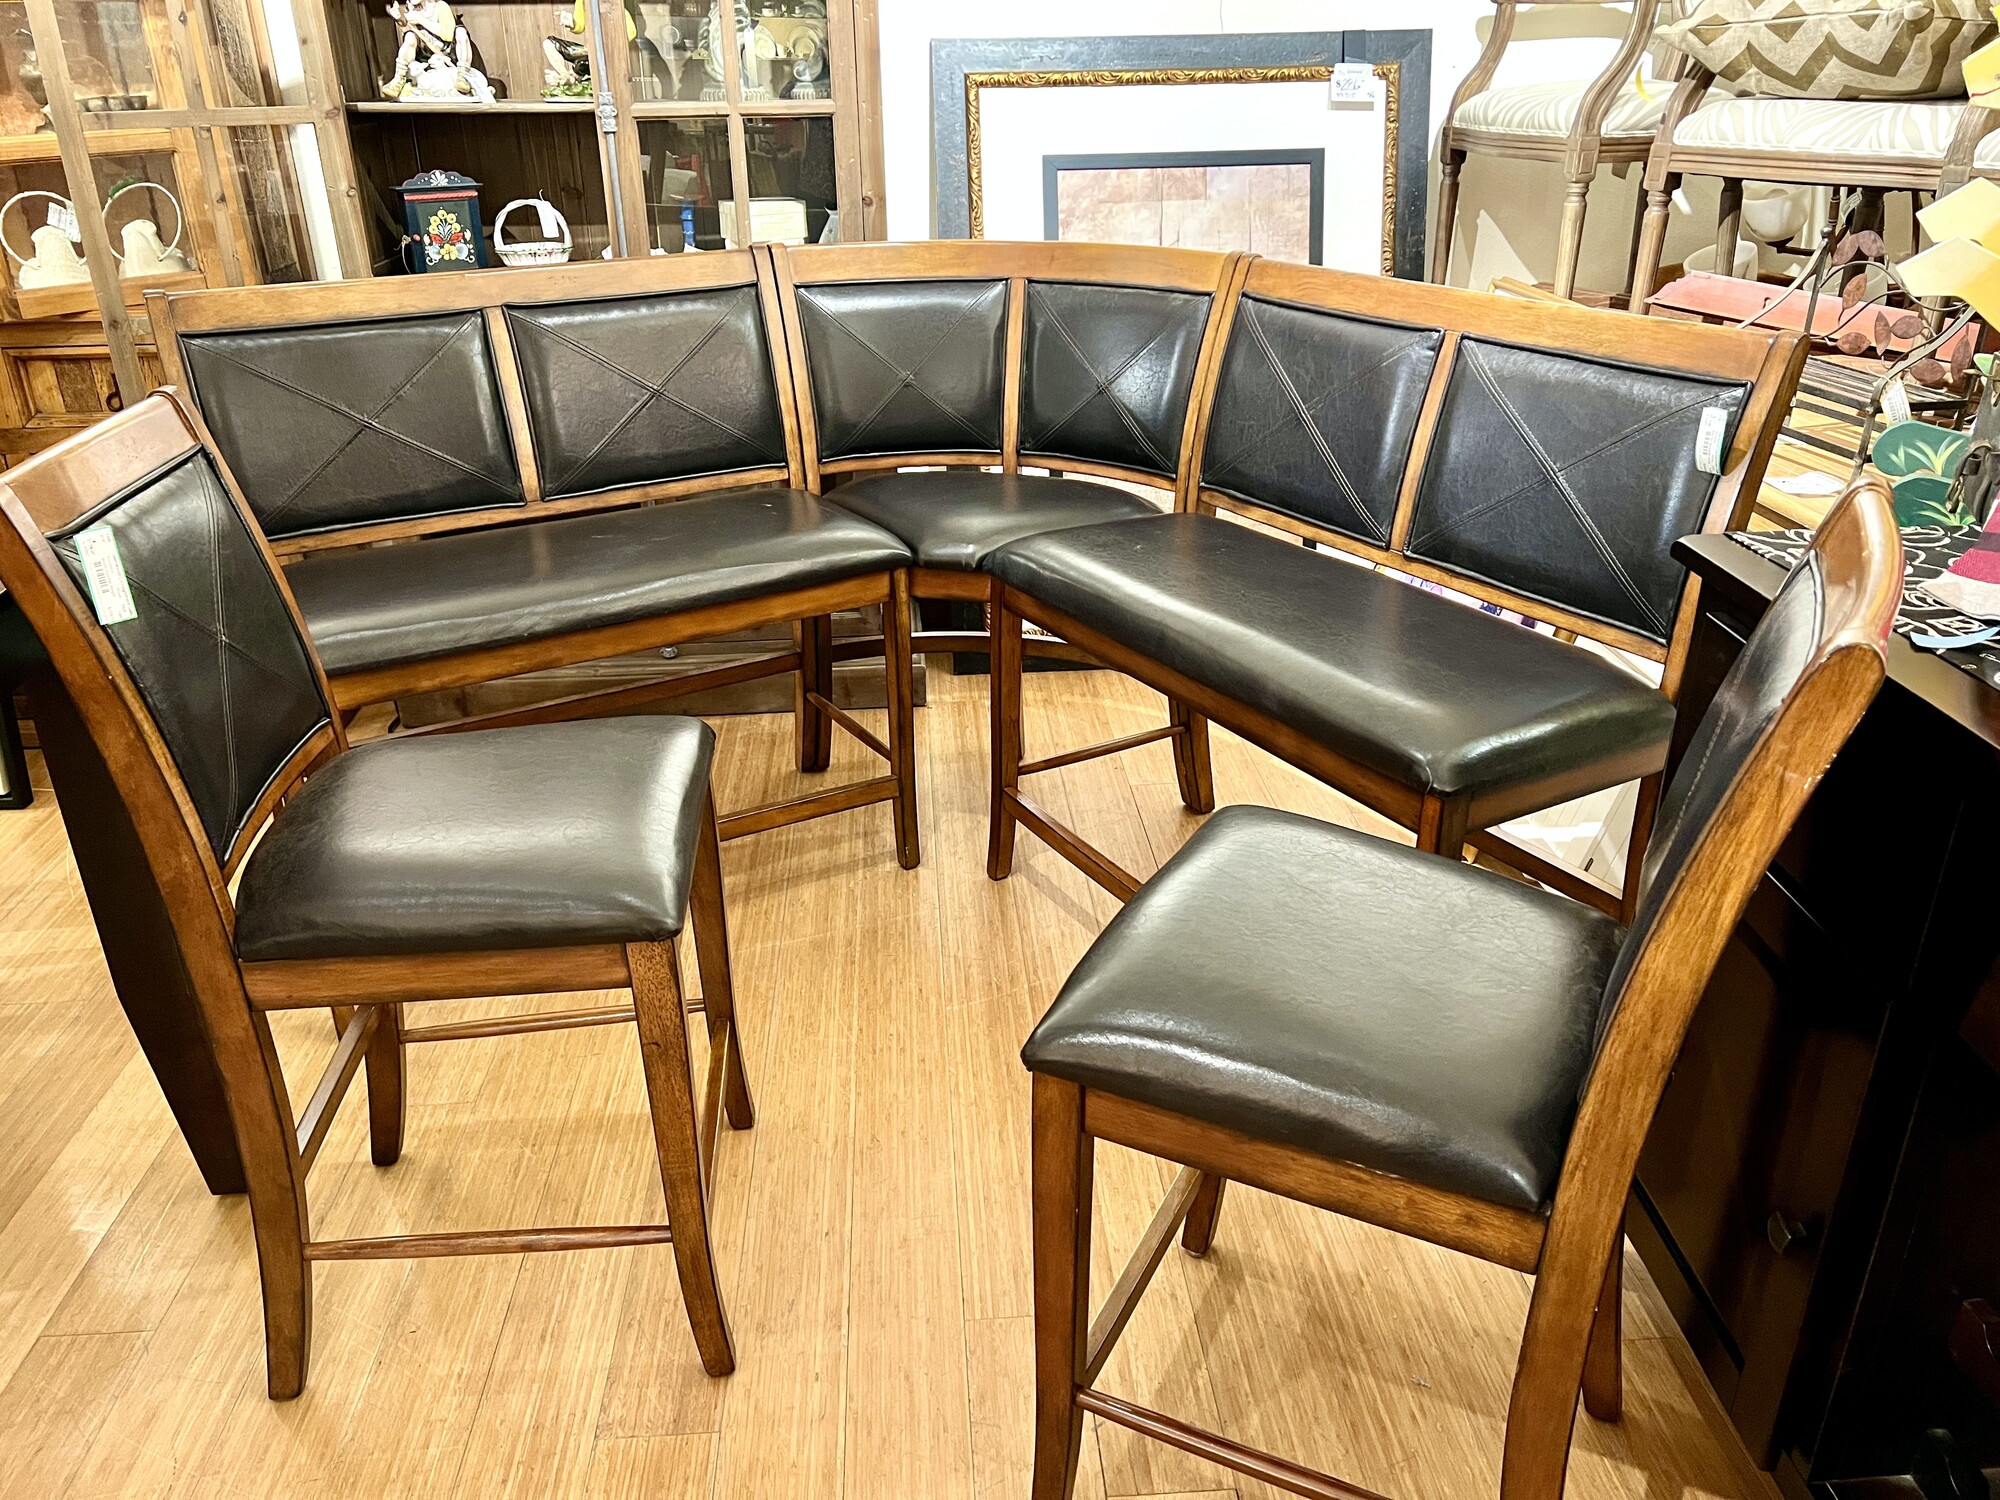 Banquette Counter height benches (3 pieces)

Also shown matching stools - Pair for $129, Item # 1095